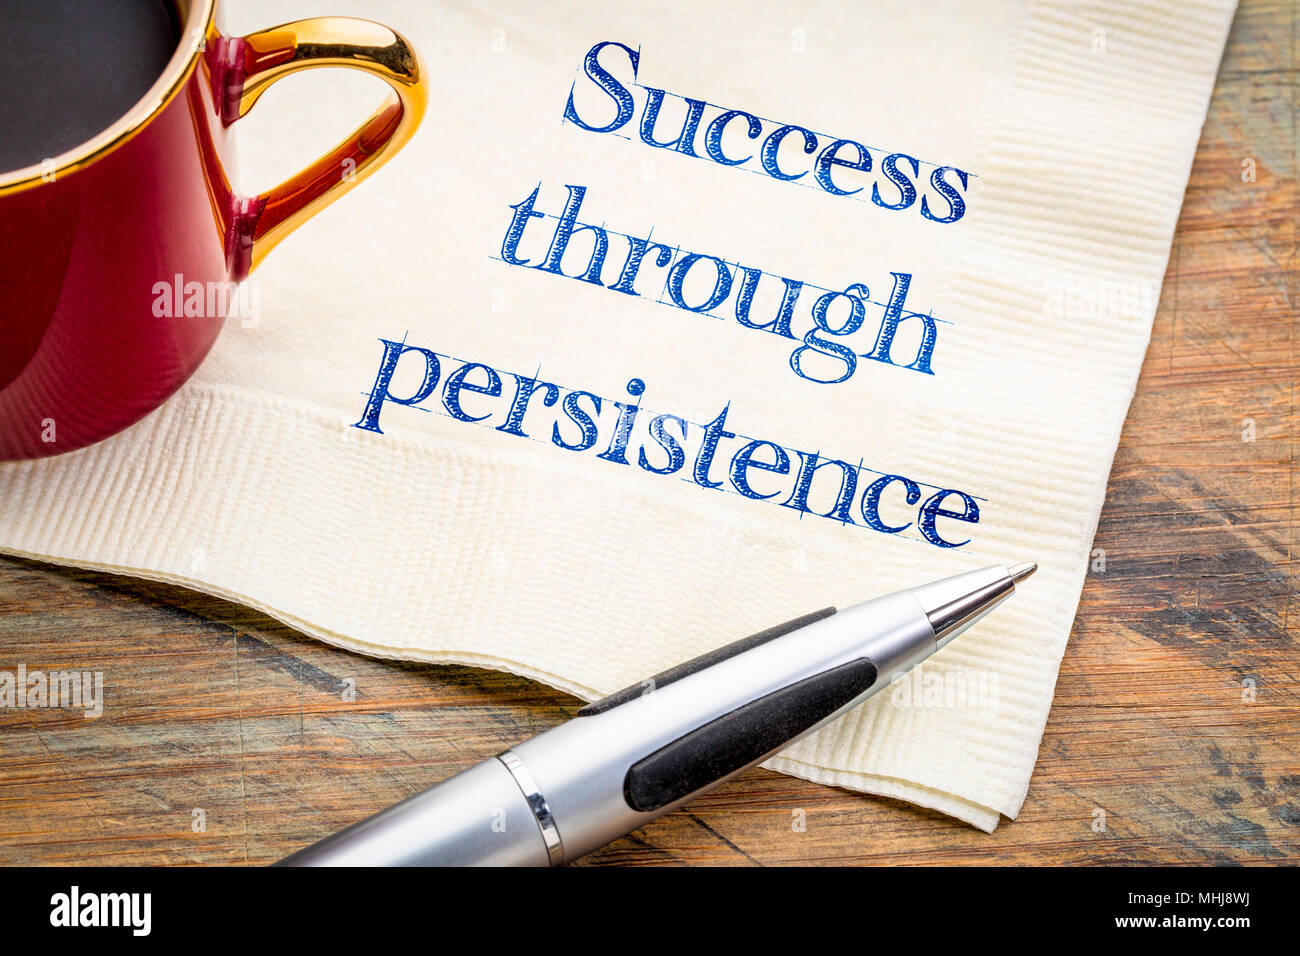 Success through persistence - inspirational handwriting on a napkin with a cup of coffee Stock Photo